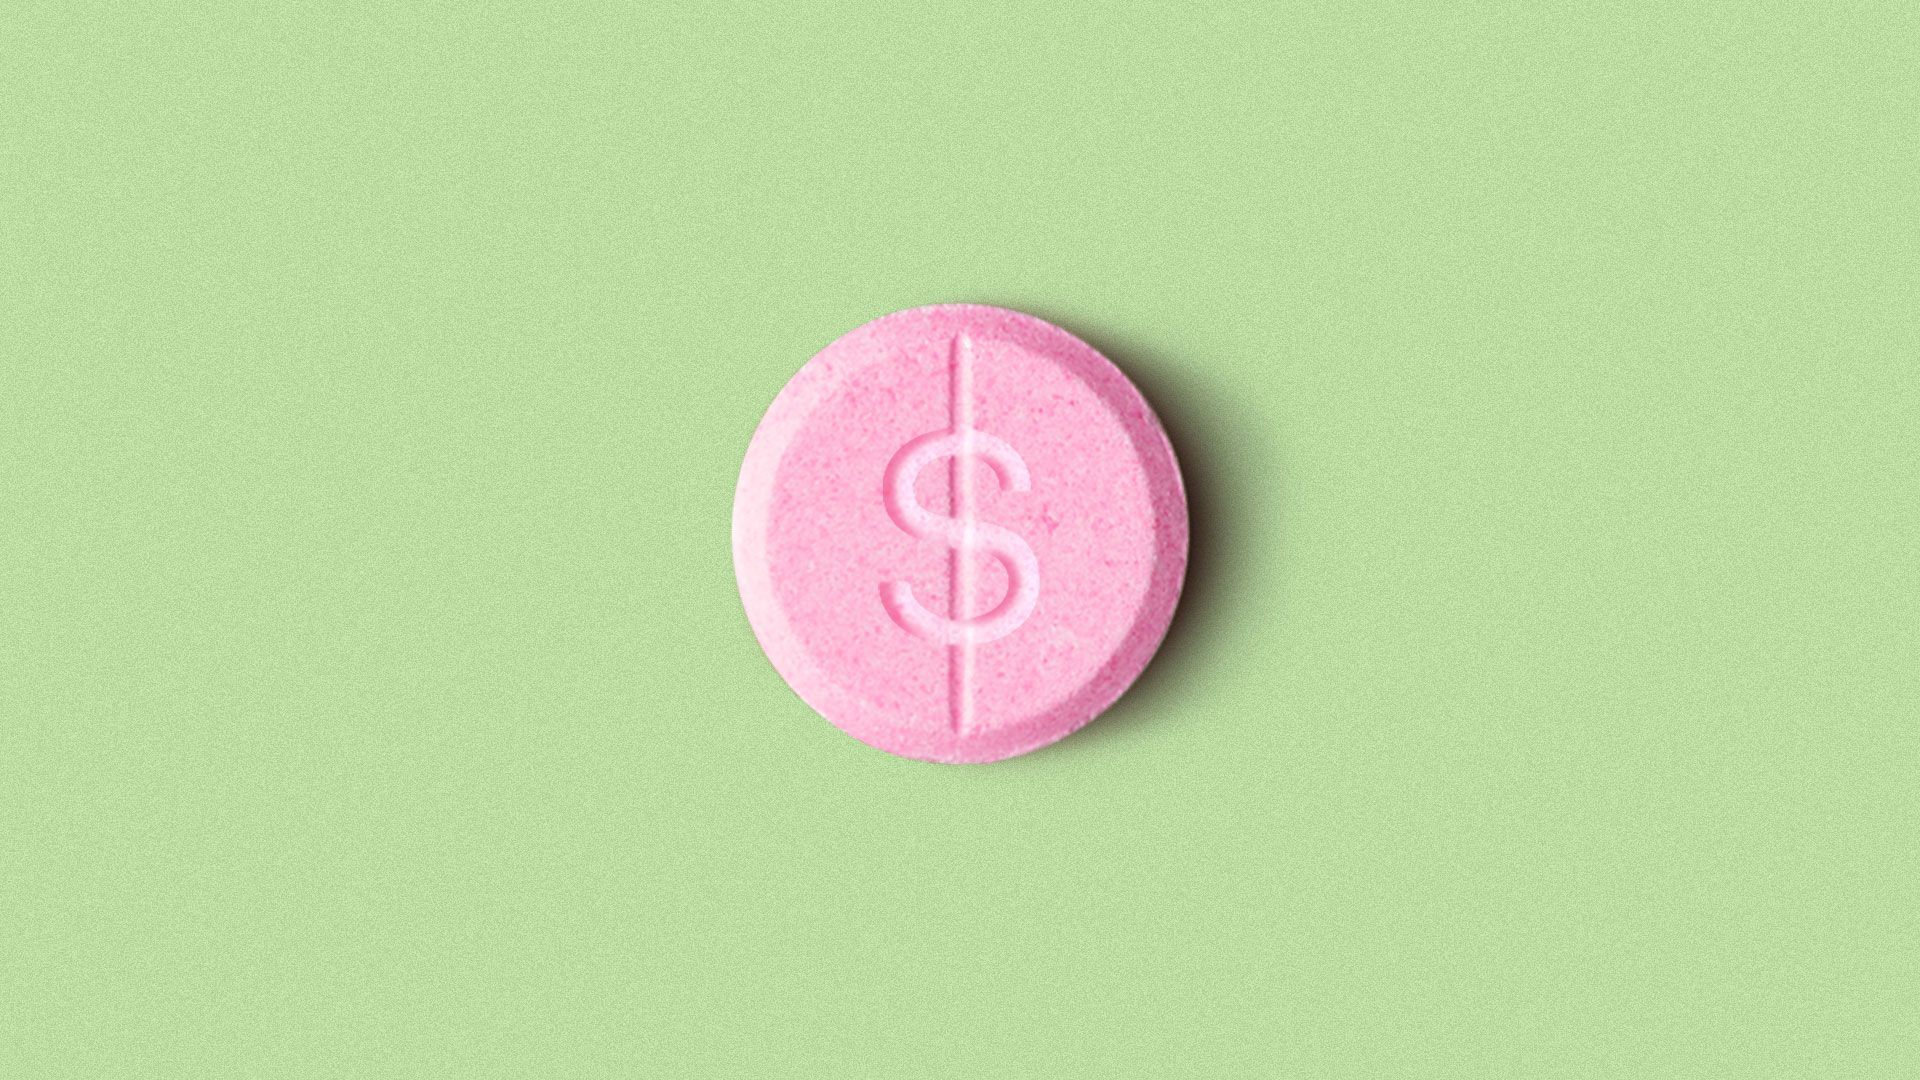 Illustration of a pill with the dividing line in the shape of a dollar bill sign.